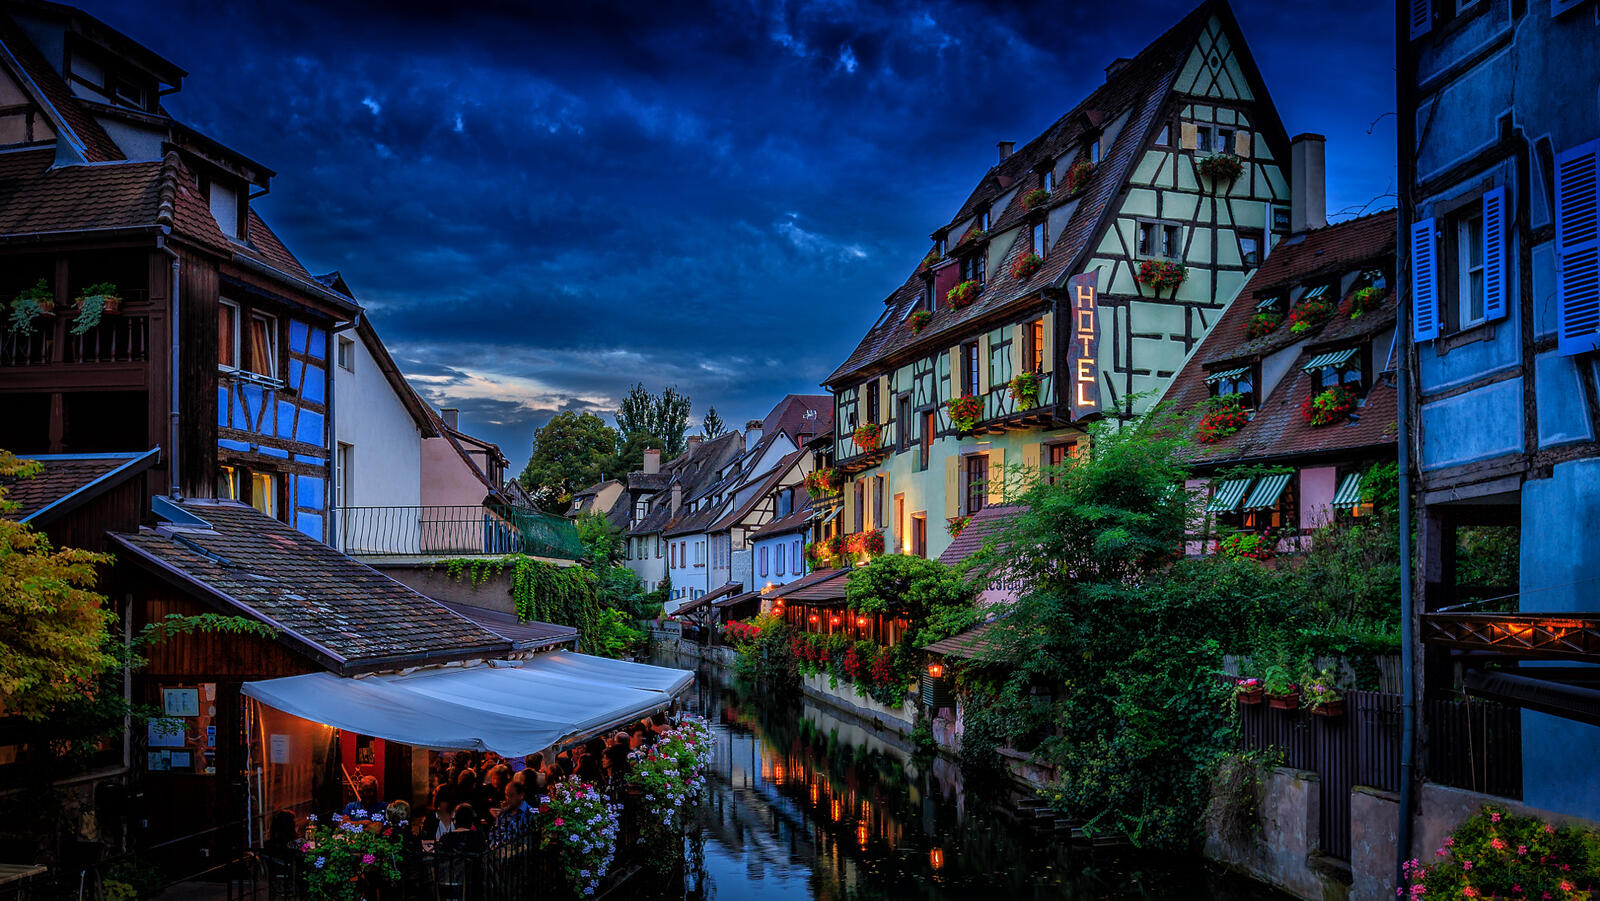 Wallpapers architecture Colmar France on the desktop